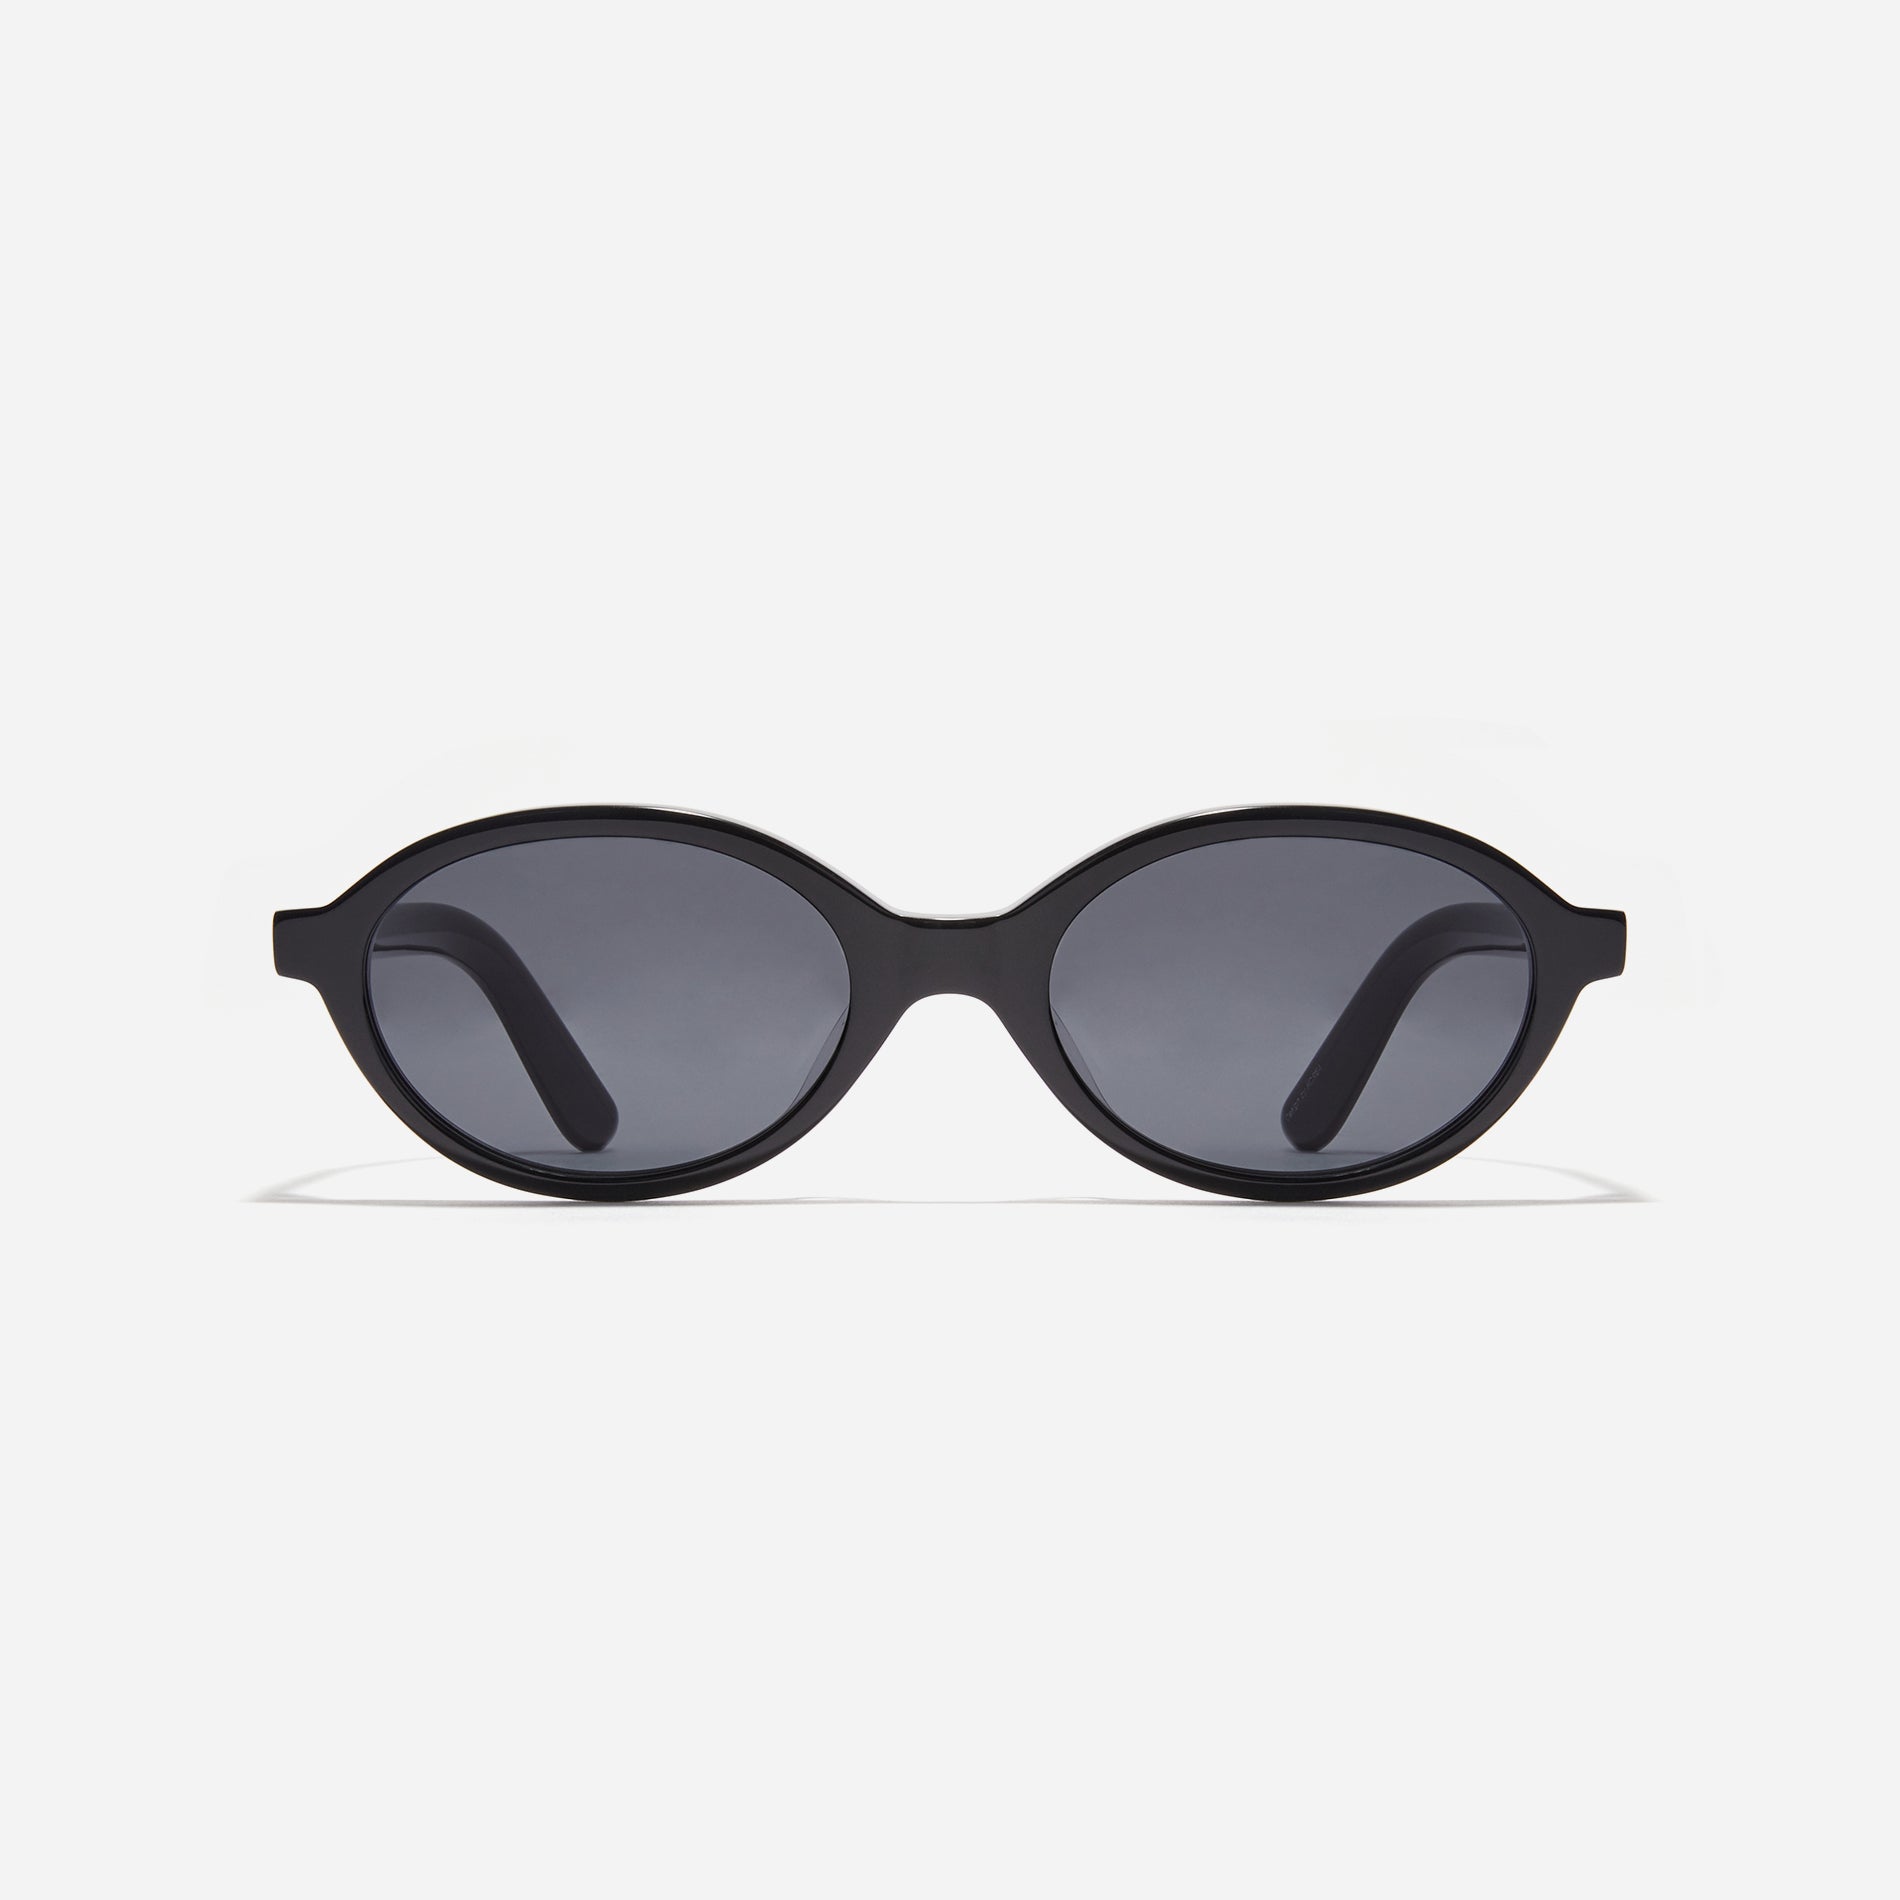 Acetate horn-rimmed glasses inspired by CARIN's best-selling 'AINO' frames. With their unique oval shape and narrow rims, they blend retro vibes with a modern twist. Discover the AINO sunglasses for a fresh take on a classic design.